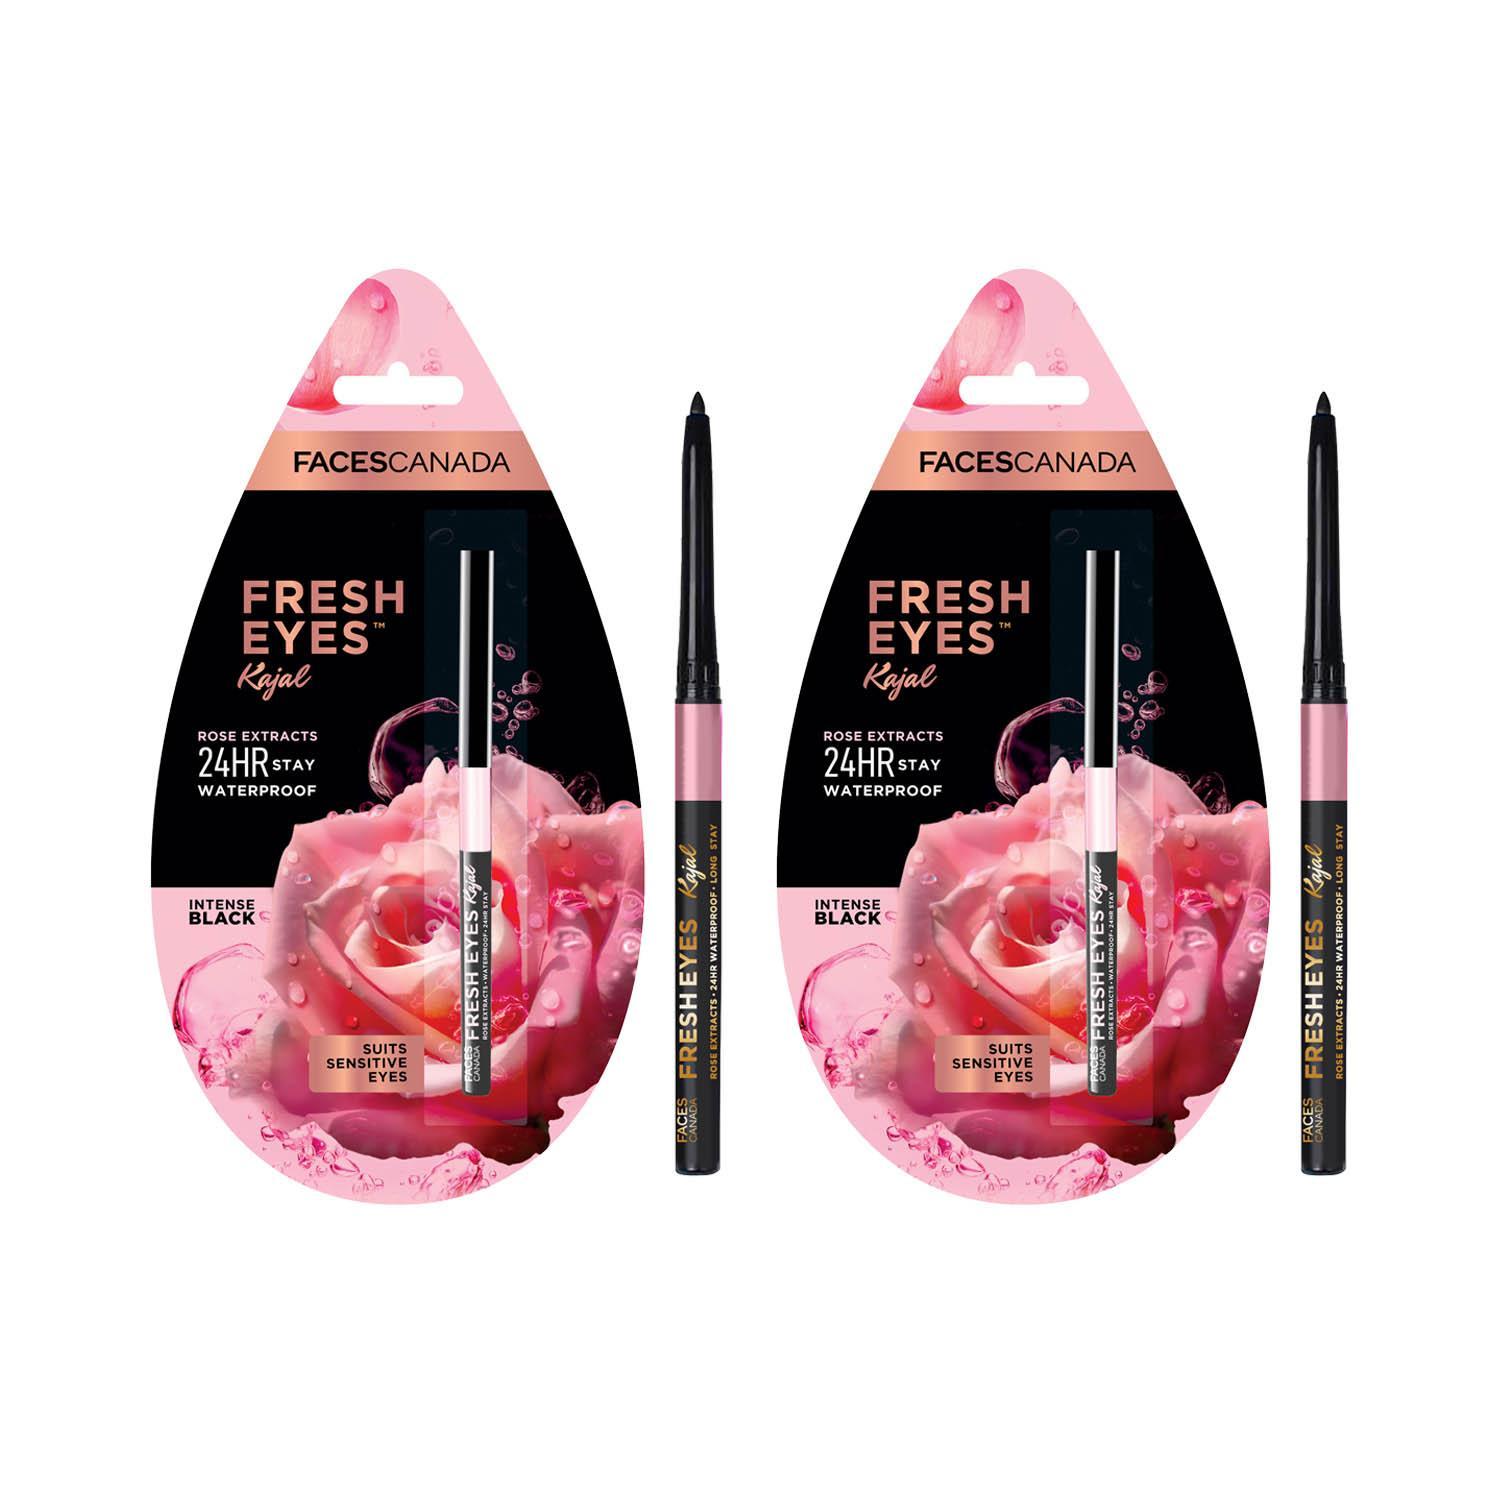 faces canada fresh eyes kajal - black, (0.35g) with rose extract (pack of 2) combo